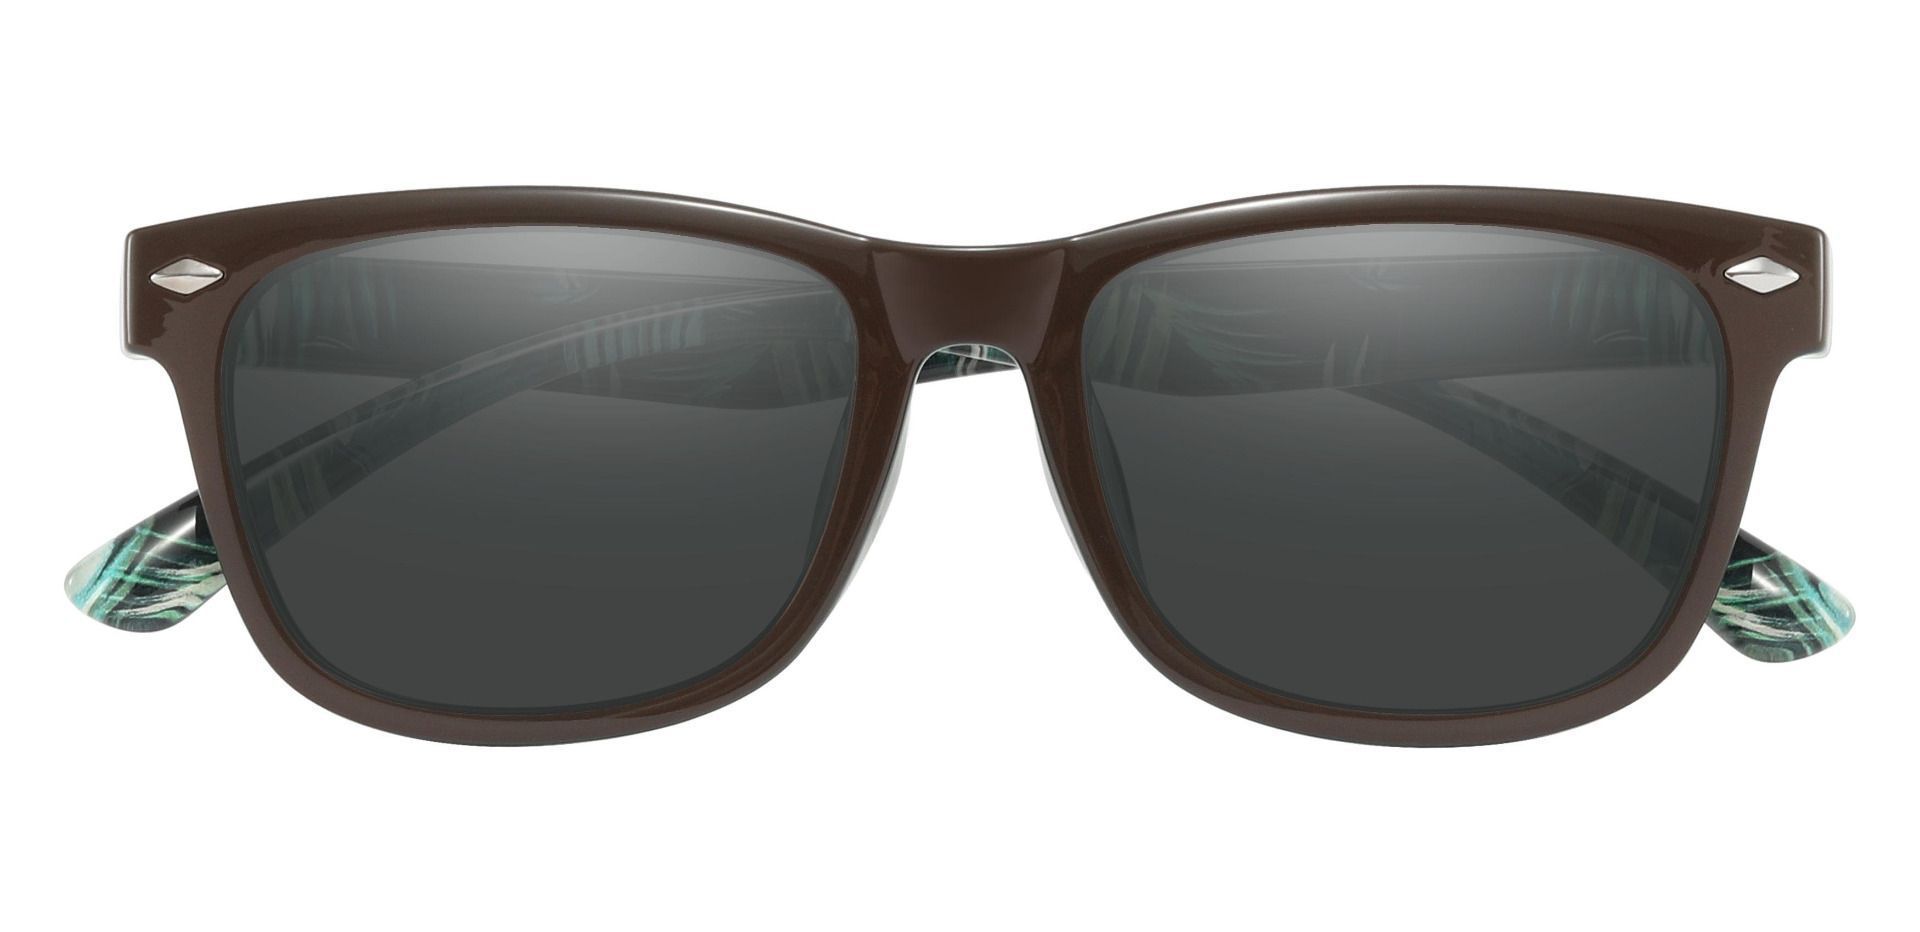 Shaler Square Lined Bifocal Sunglasses - Brown Frame With Gray Lenses